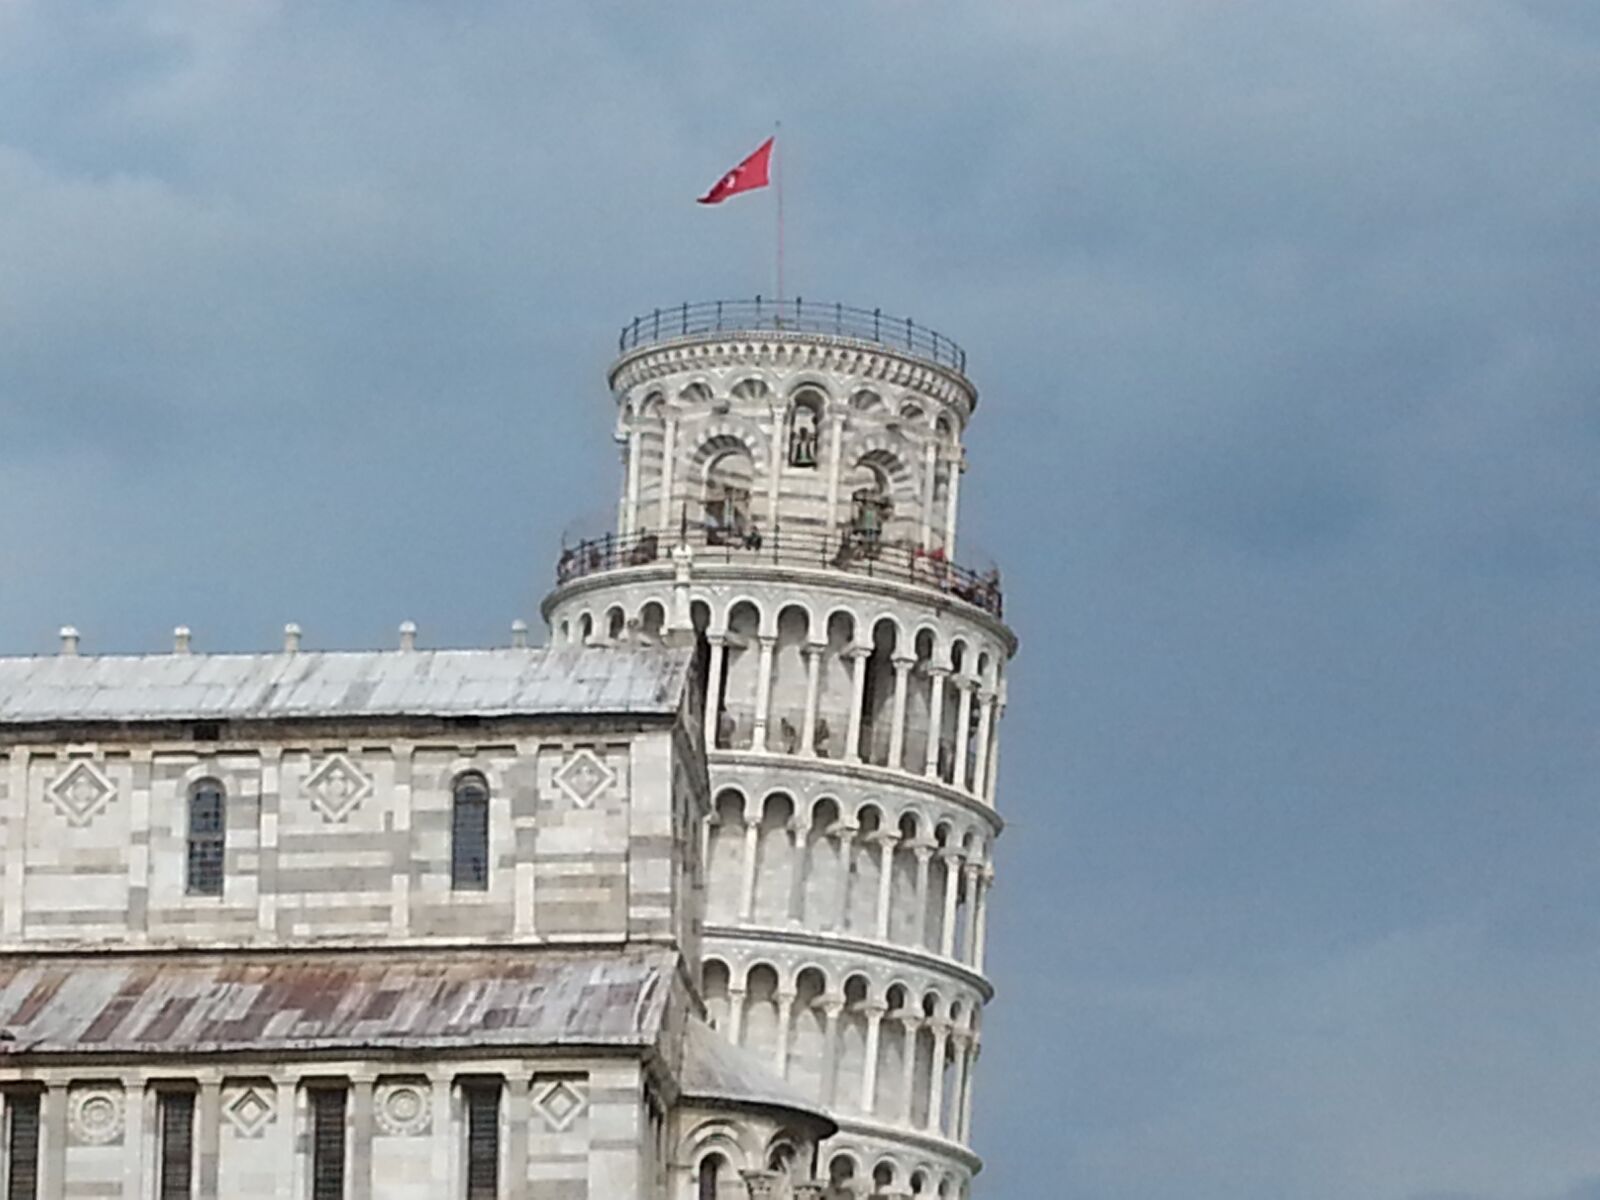 Samsung Galaxy S3 sample photo. Pisa, leaning tower of photography